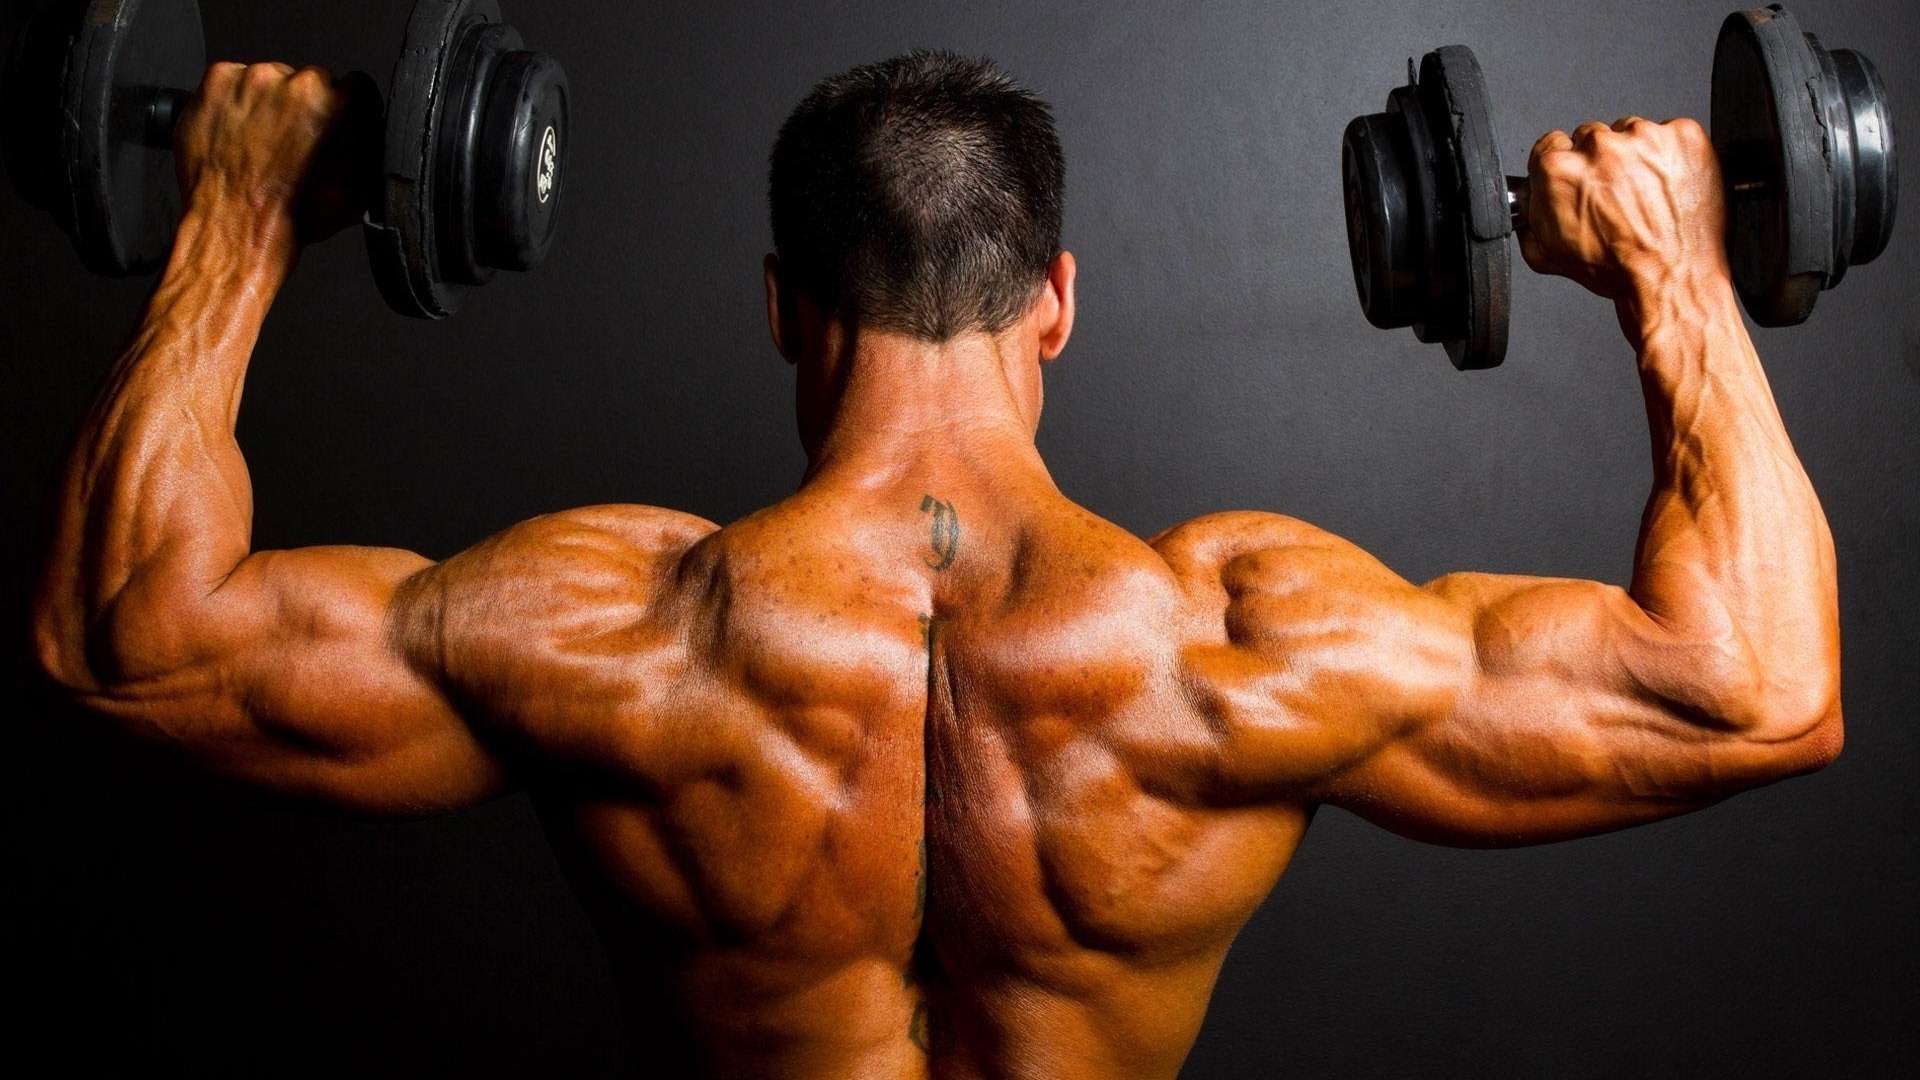 Bodybuilding Wallpaper HD Best Collection Free Download